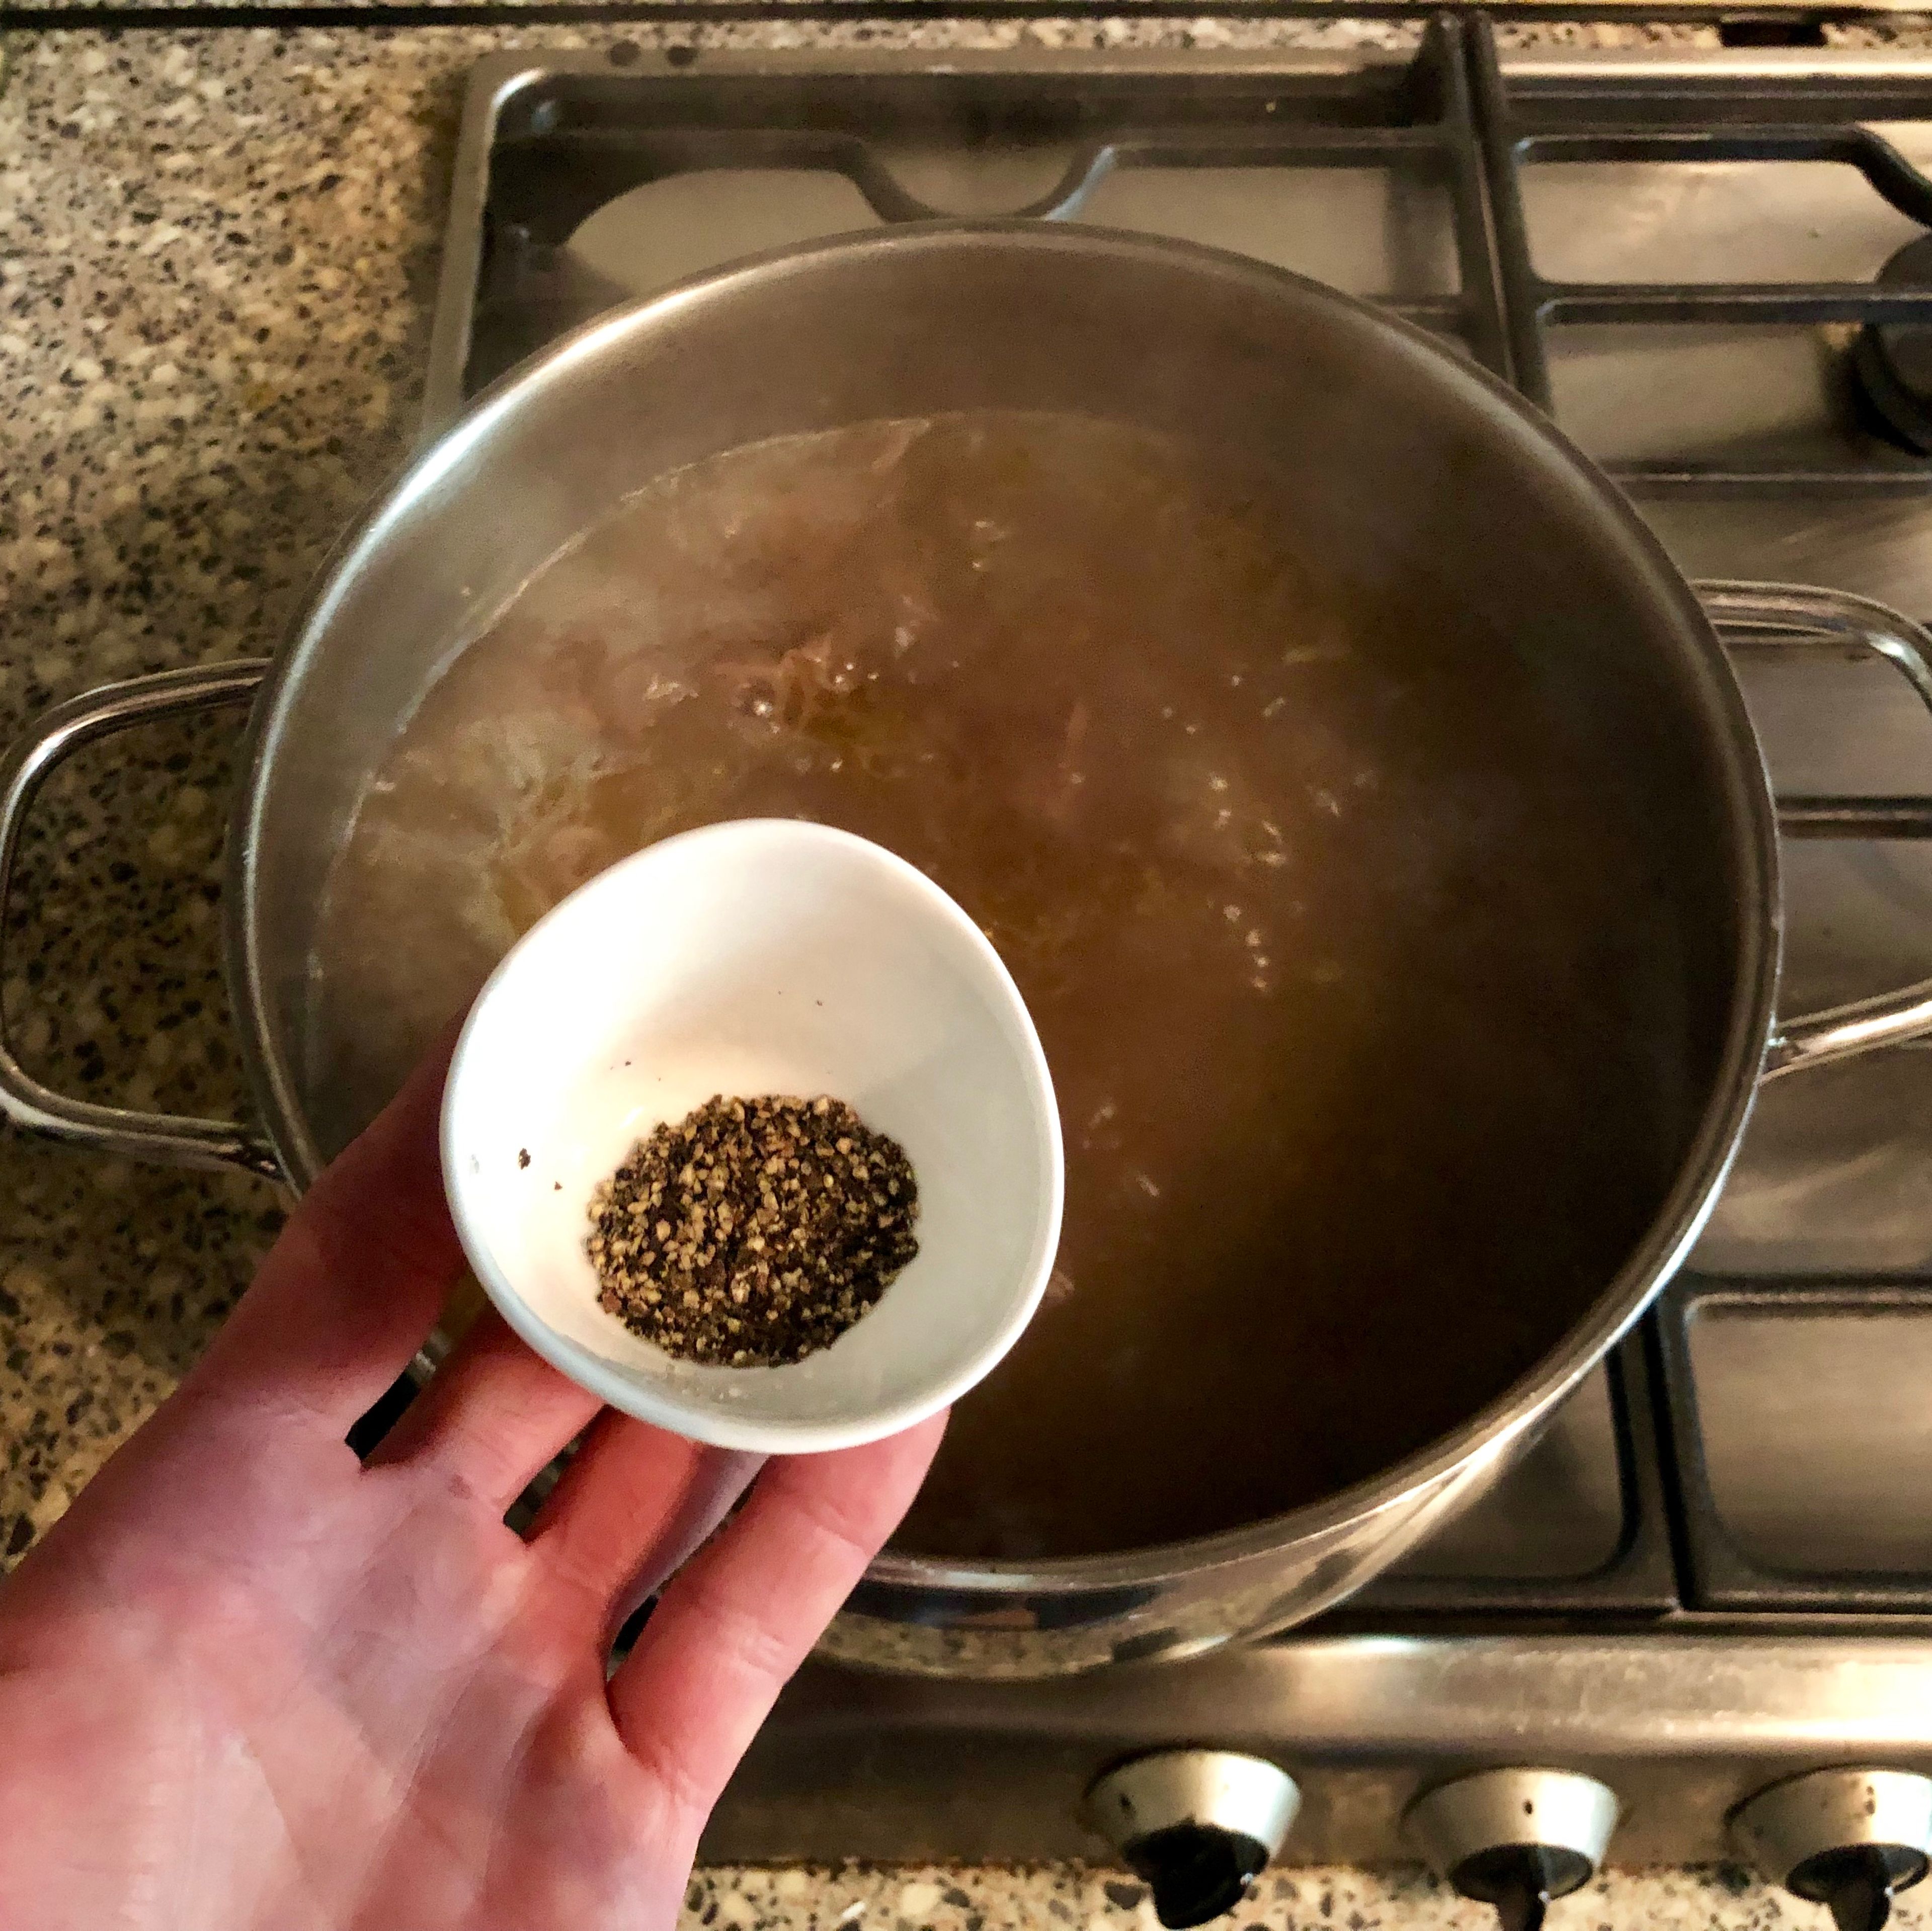 Add black pepper. Put the lid of the stockpot on and cook in a low heat for about 45 minutes. When it’s done, take off the heat and leave aside.